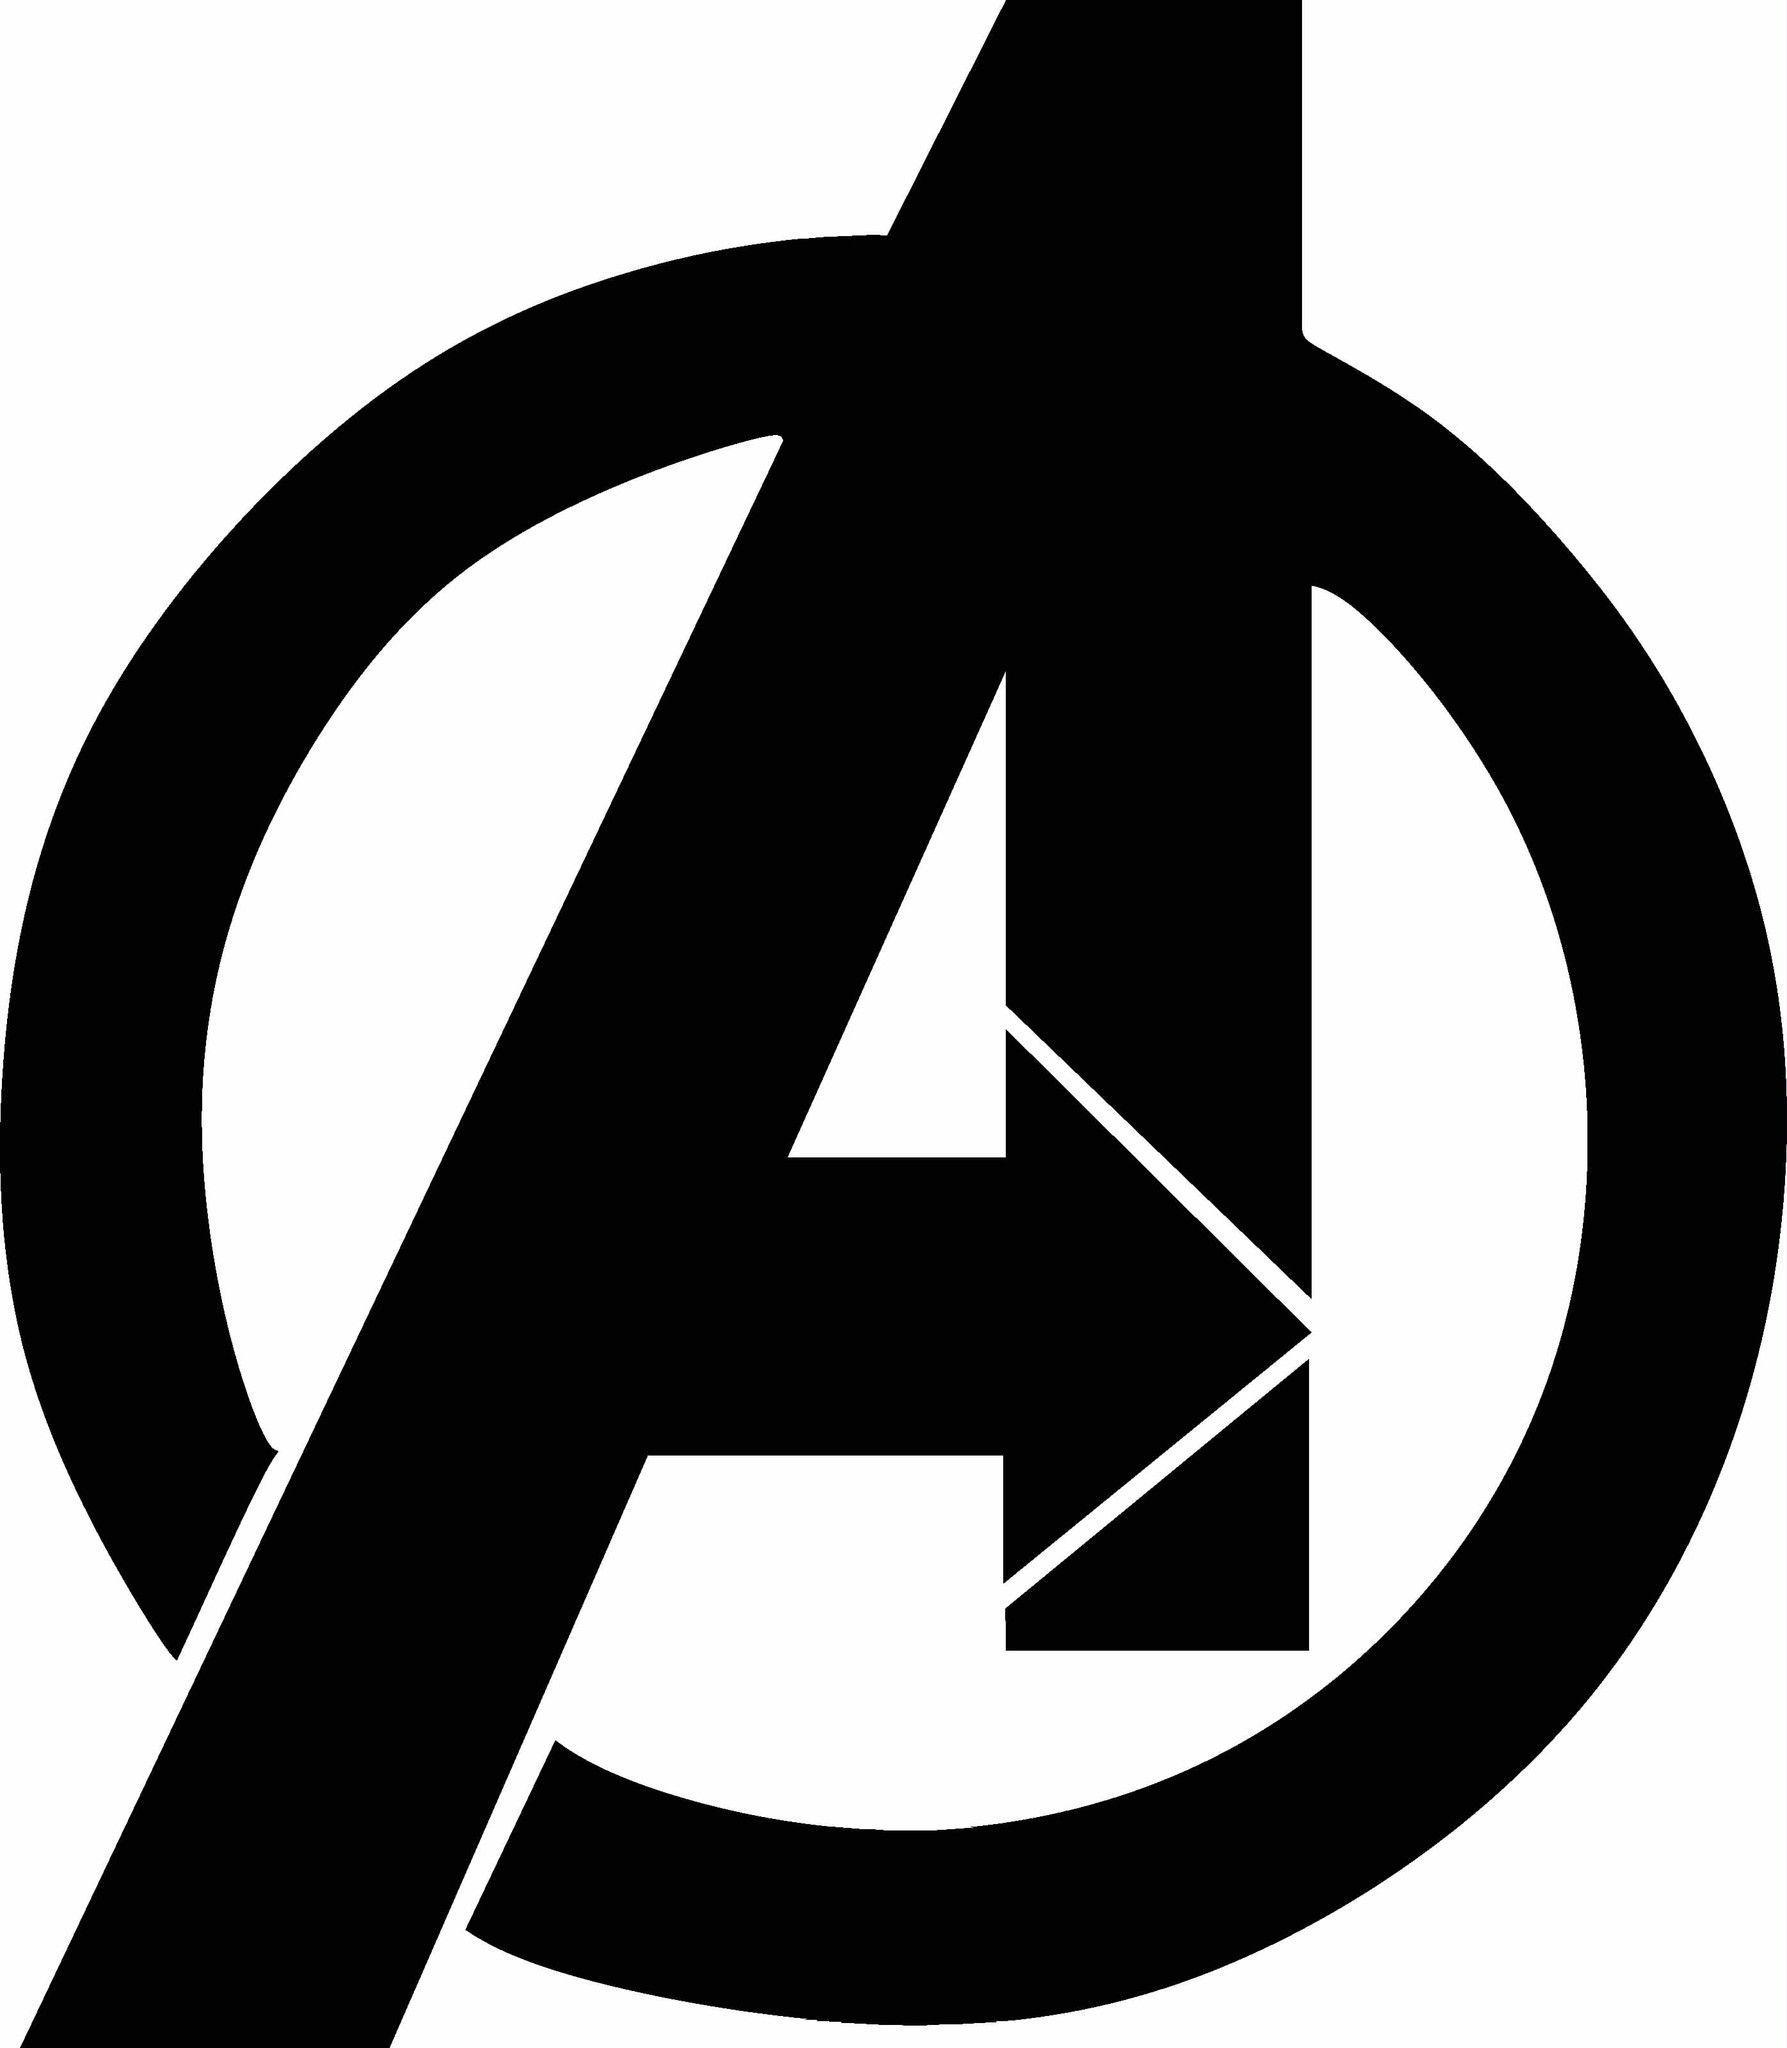 All the Avengers Logo - Avengers Logo Vinyl Decal Graphic - Choose your Color and Size ...